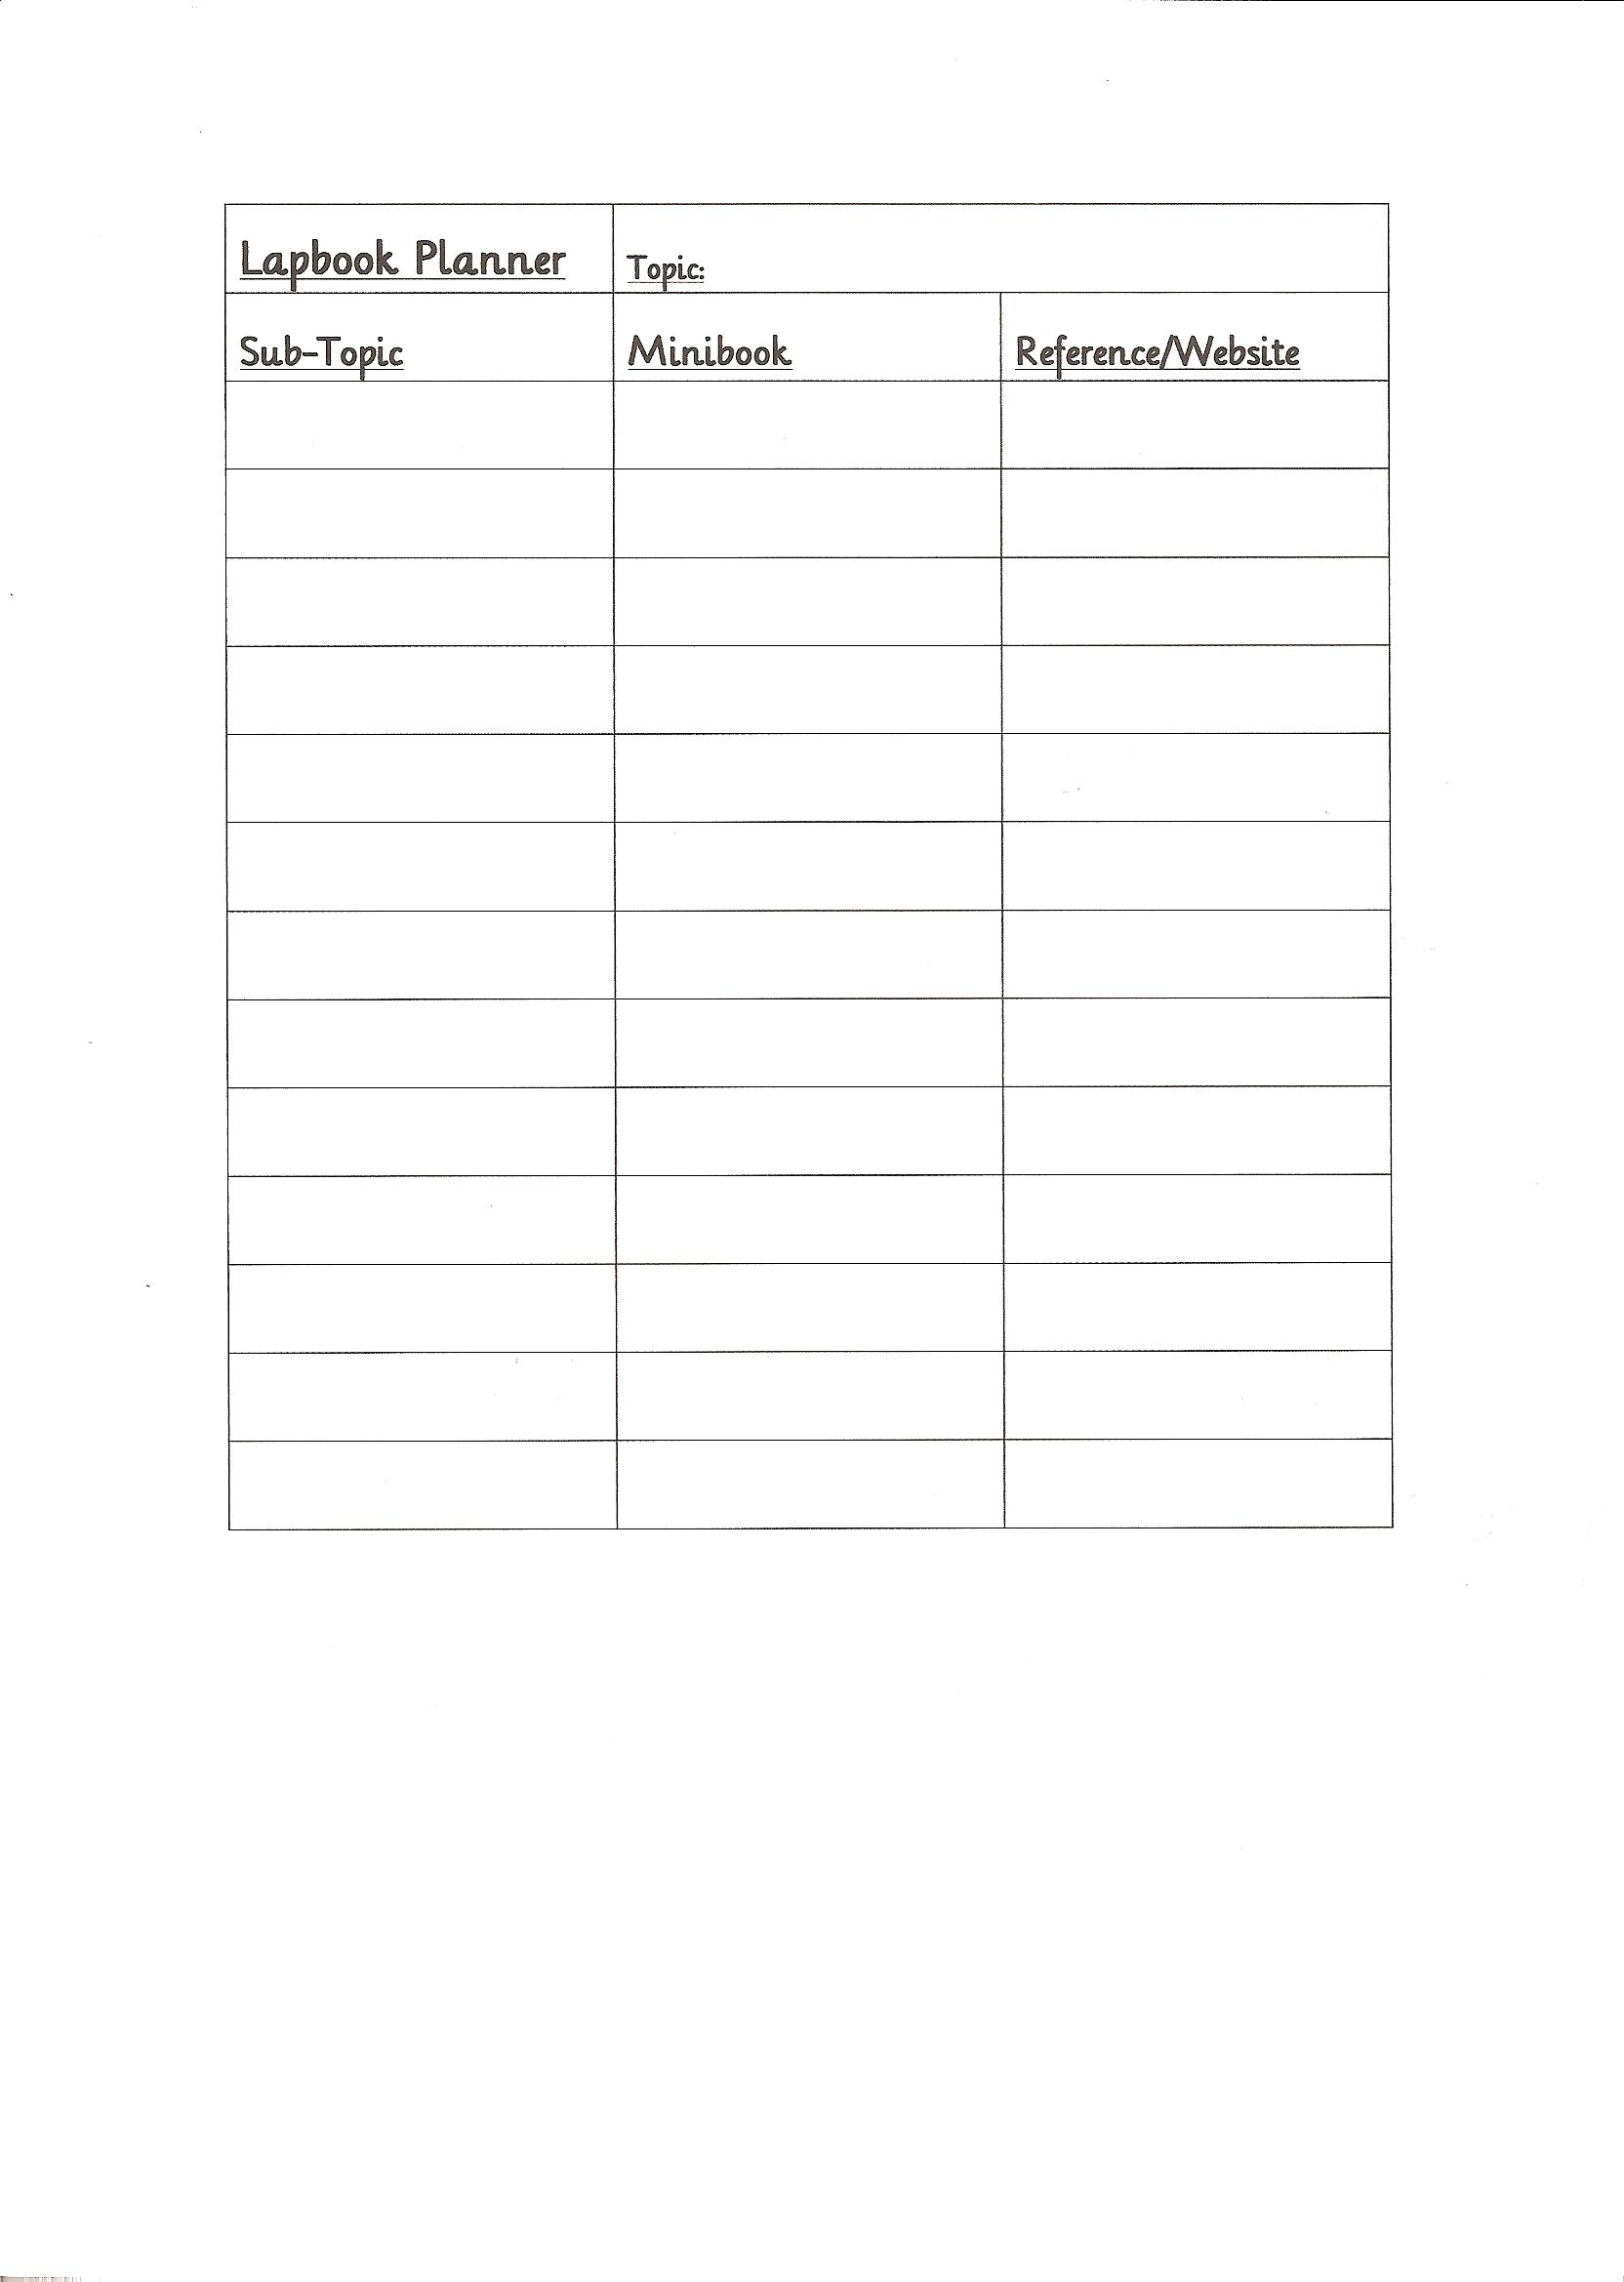 Minibook Master Template Download | Practical Pages Intended For Notebook Paper Template For Word 2010